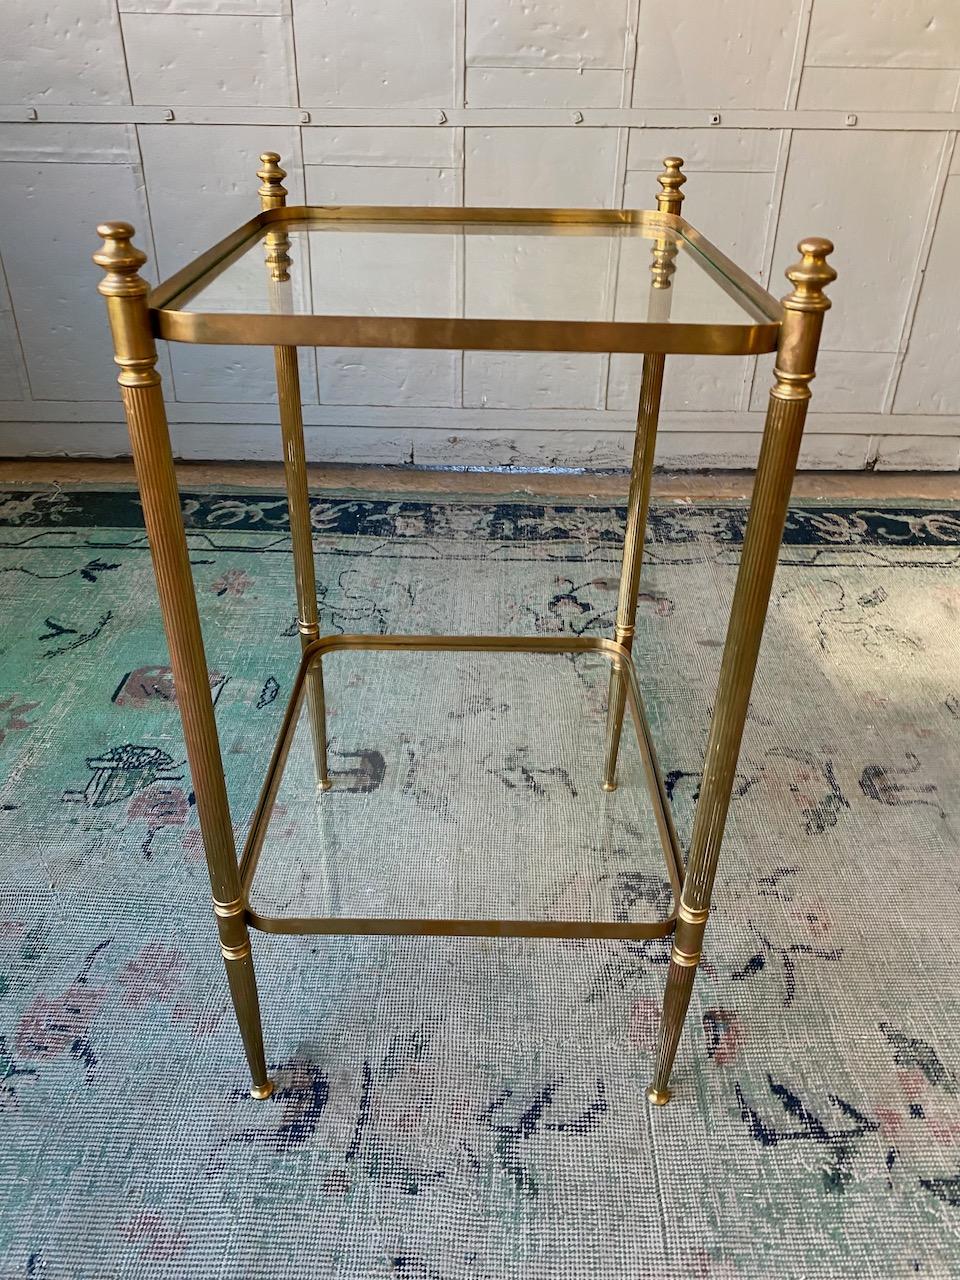 An exceptional neoclassical style brass and glass two-tiered side table with rounded edges. This beautiful neoclassical style side table exudes an air of elegance and sophistication. Crafted from brass and glass, this two-tiered table is a true work